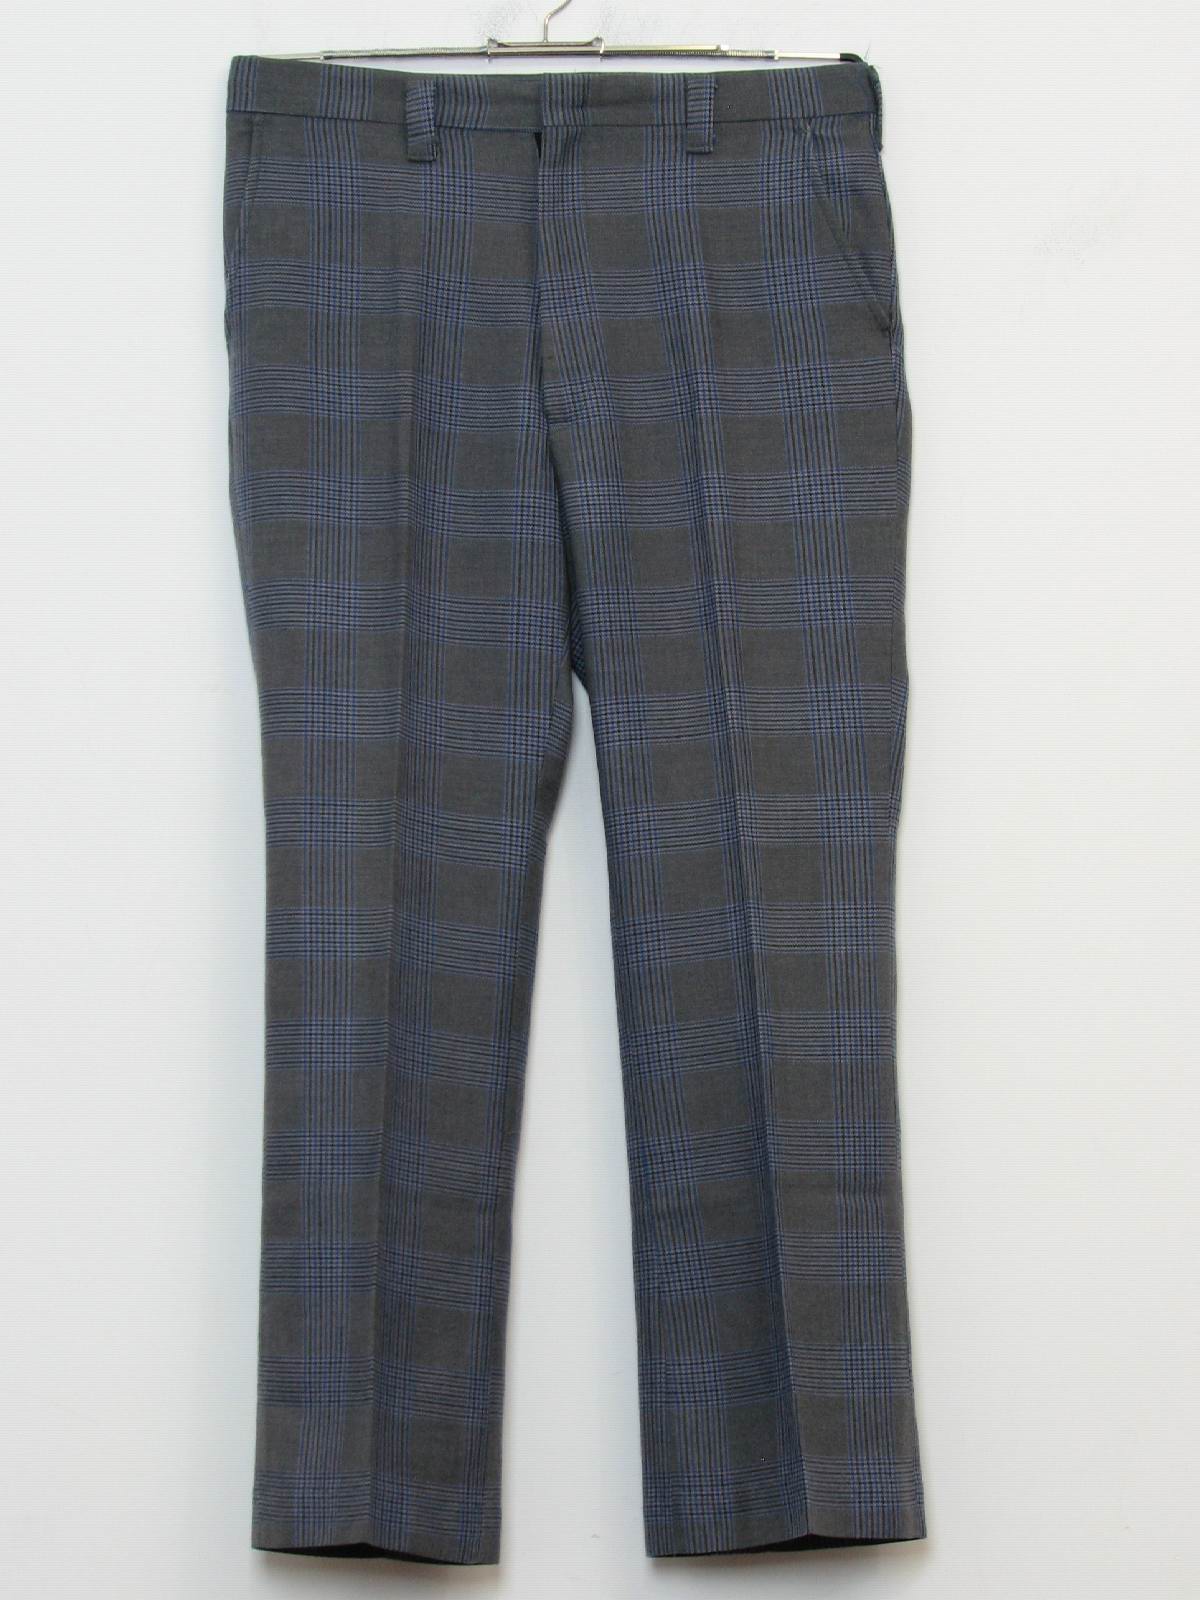 70s Retro Flared Pants / Flares: 70s -Worn Label- Mens grey, blue and ...